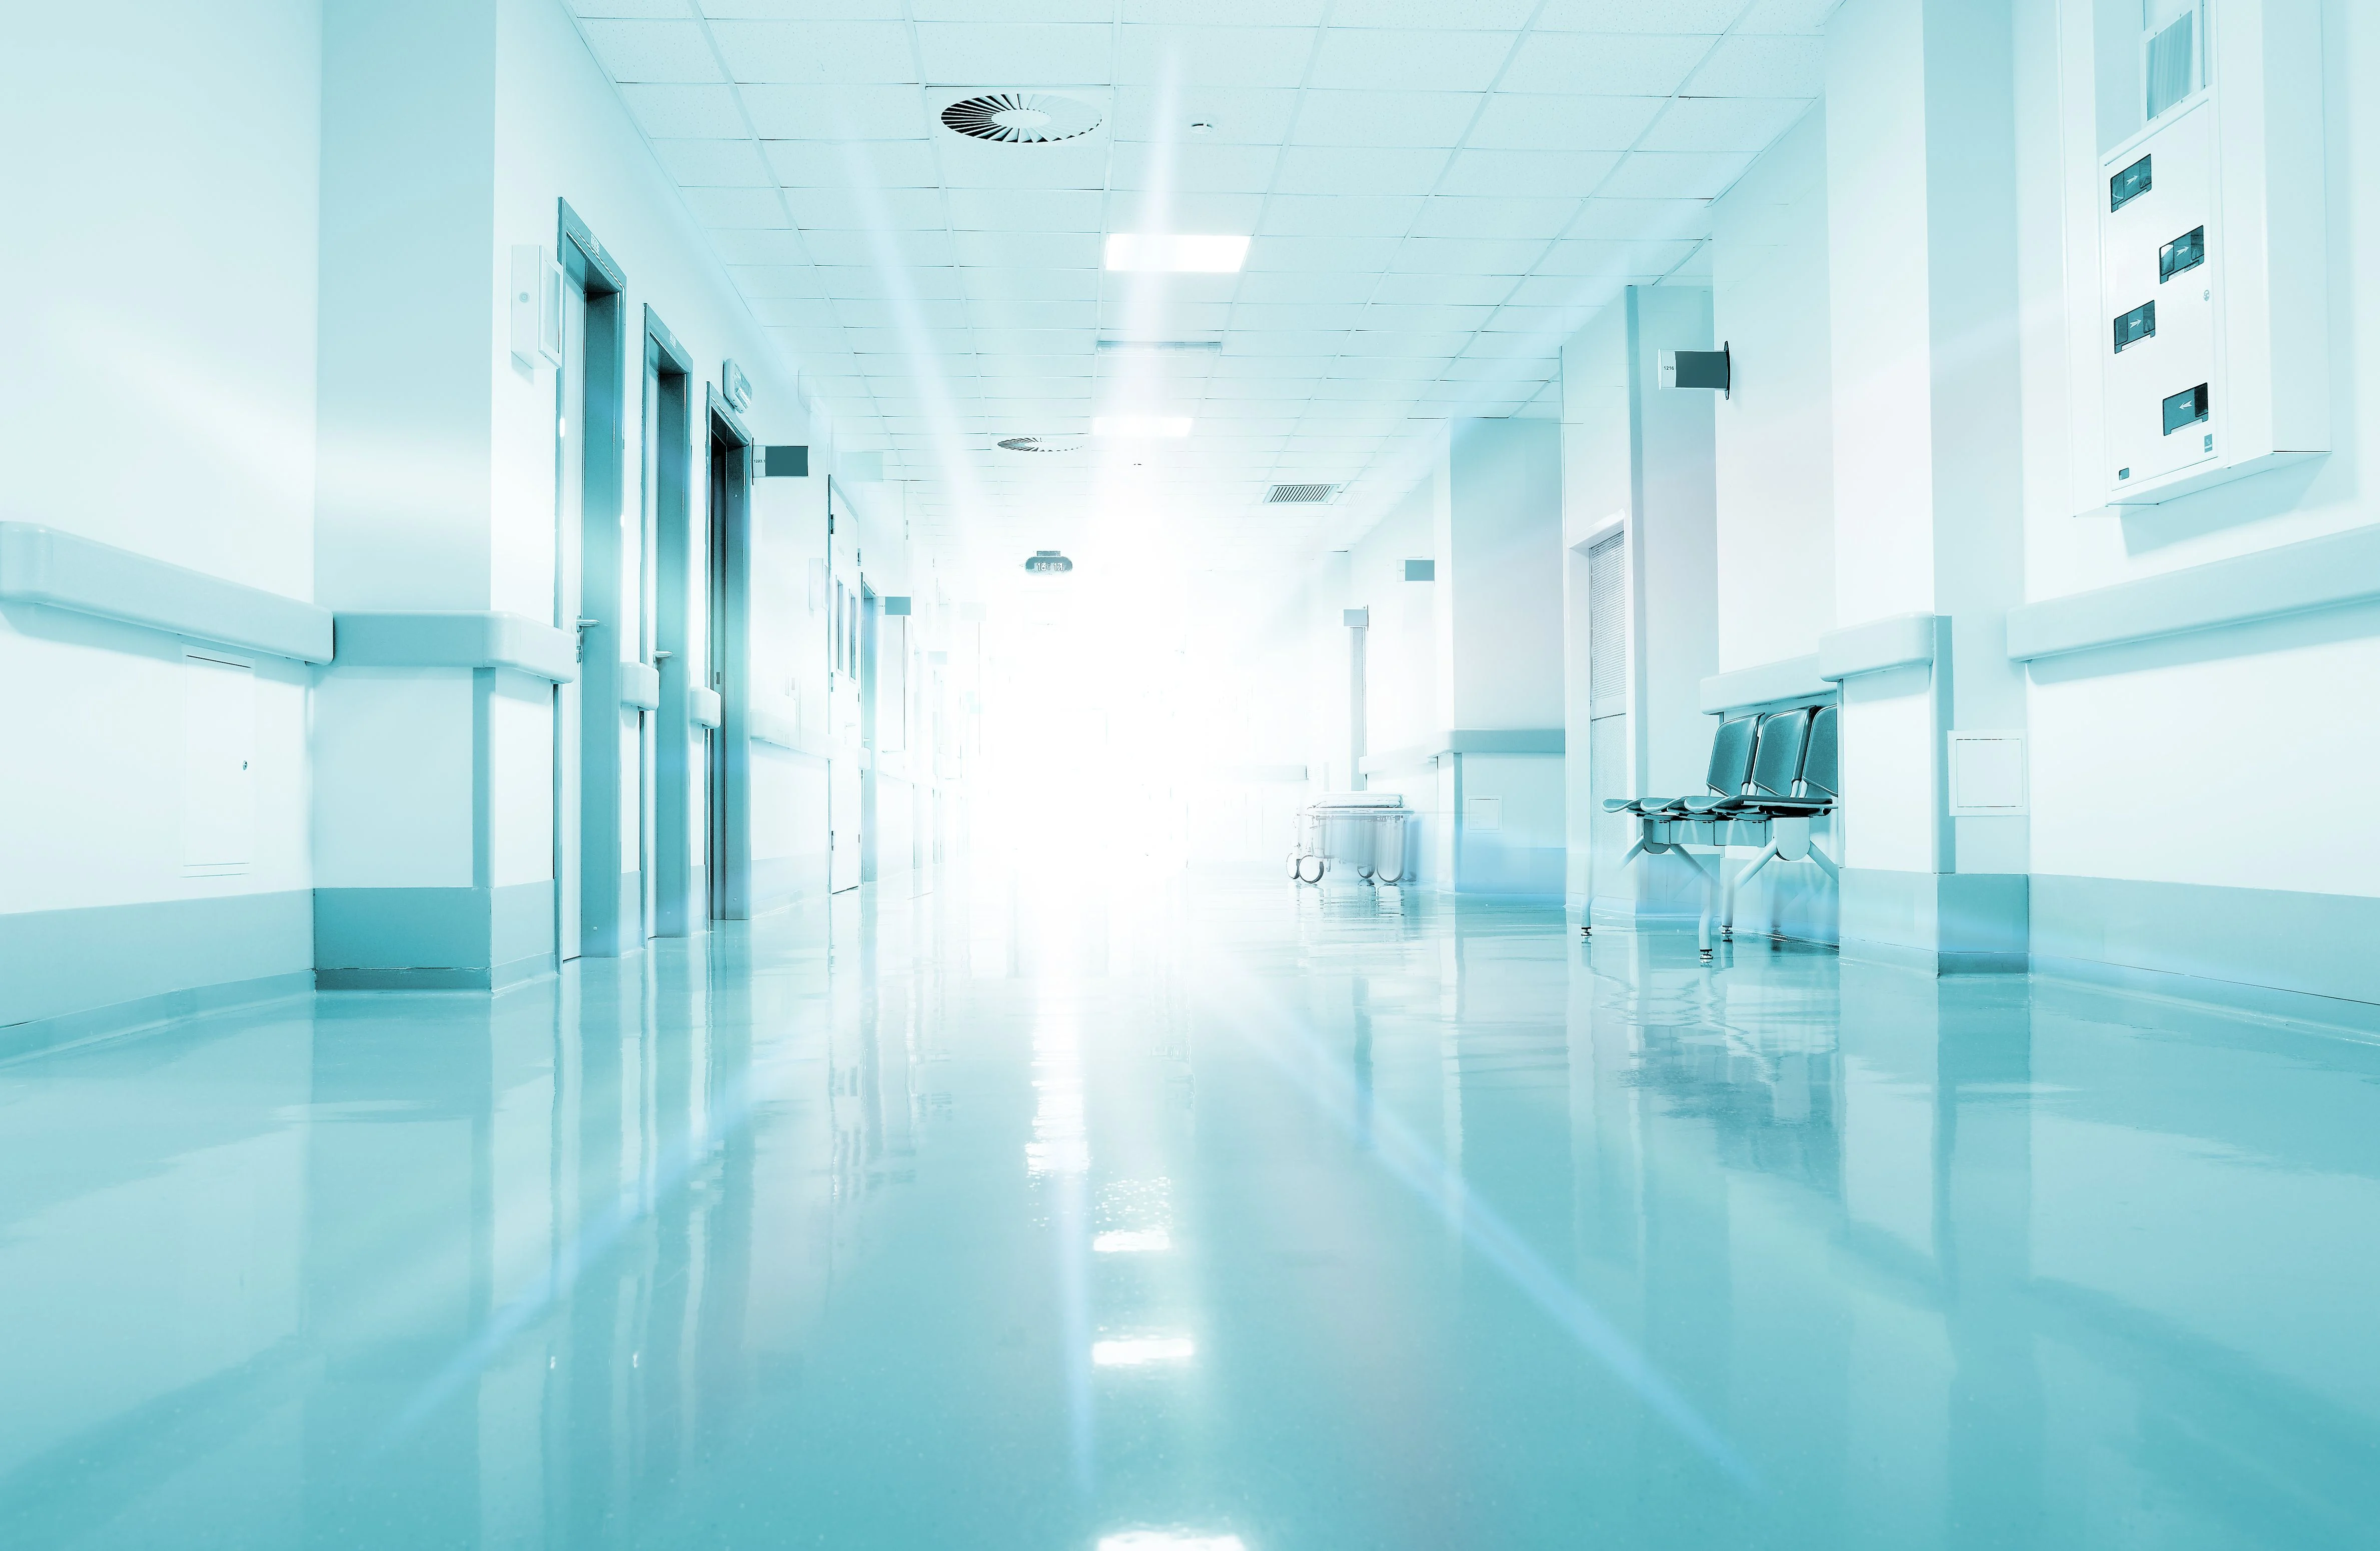 A legal unfinished framework prevents the creation of hospital networks.